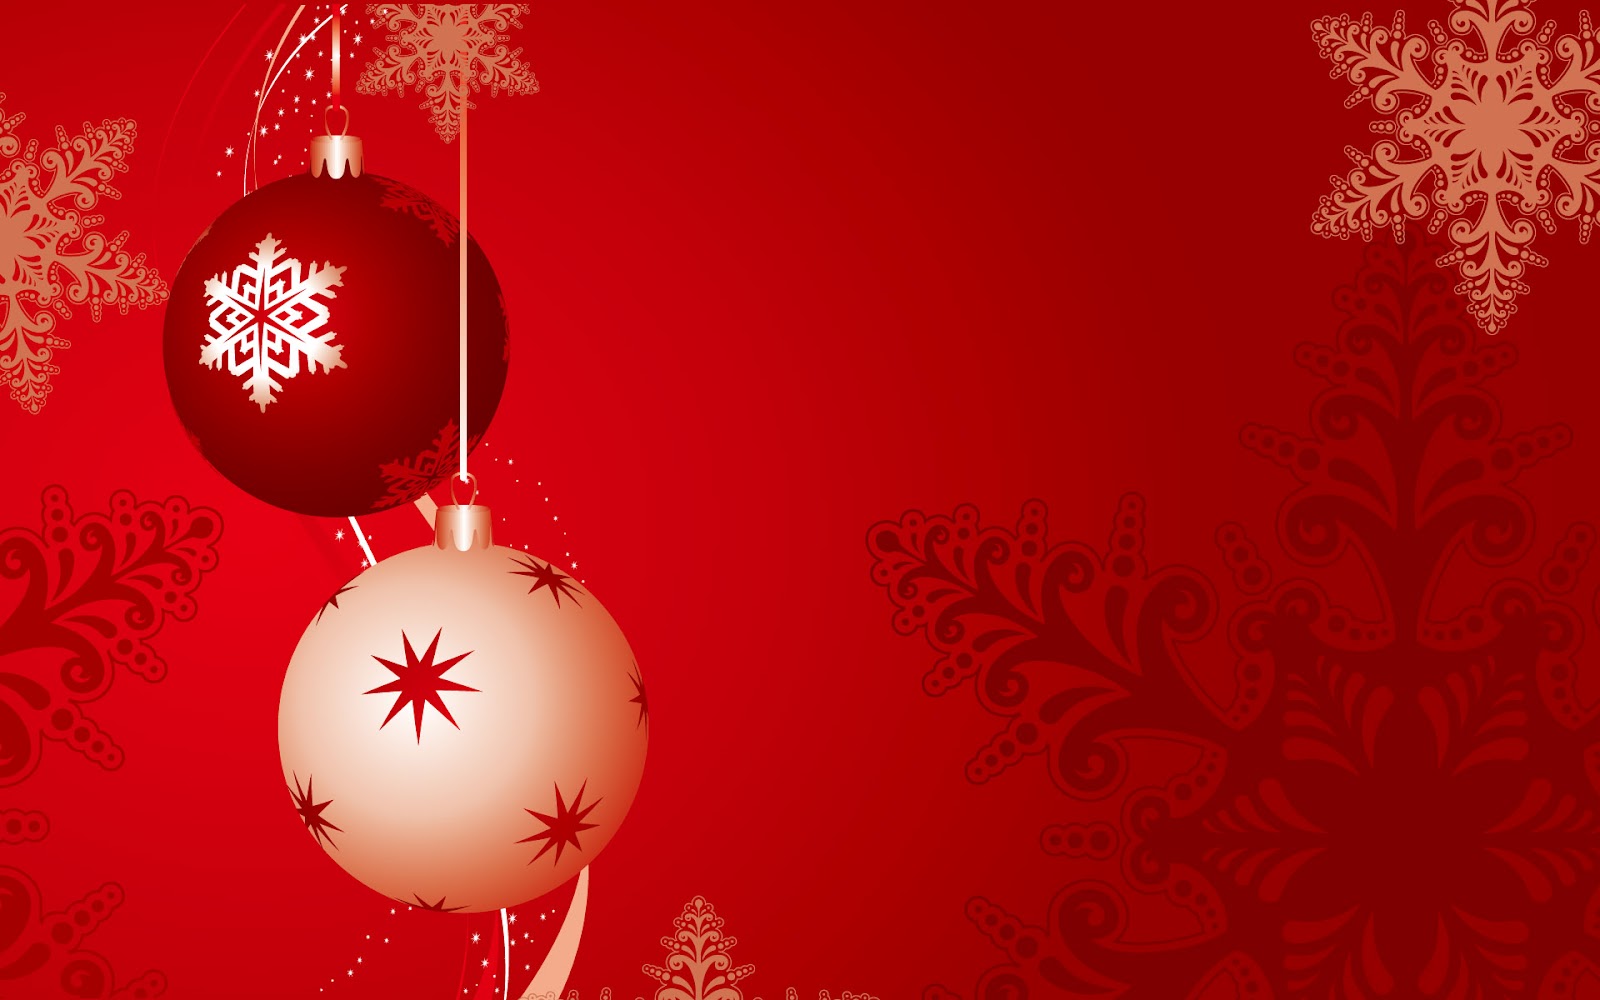 Cute Christmas Wallpaper 7911 Hd Wallpapers in Celebrations   Imagesci 1600x1000